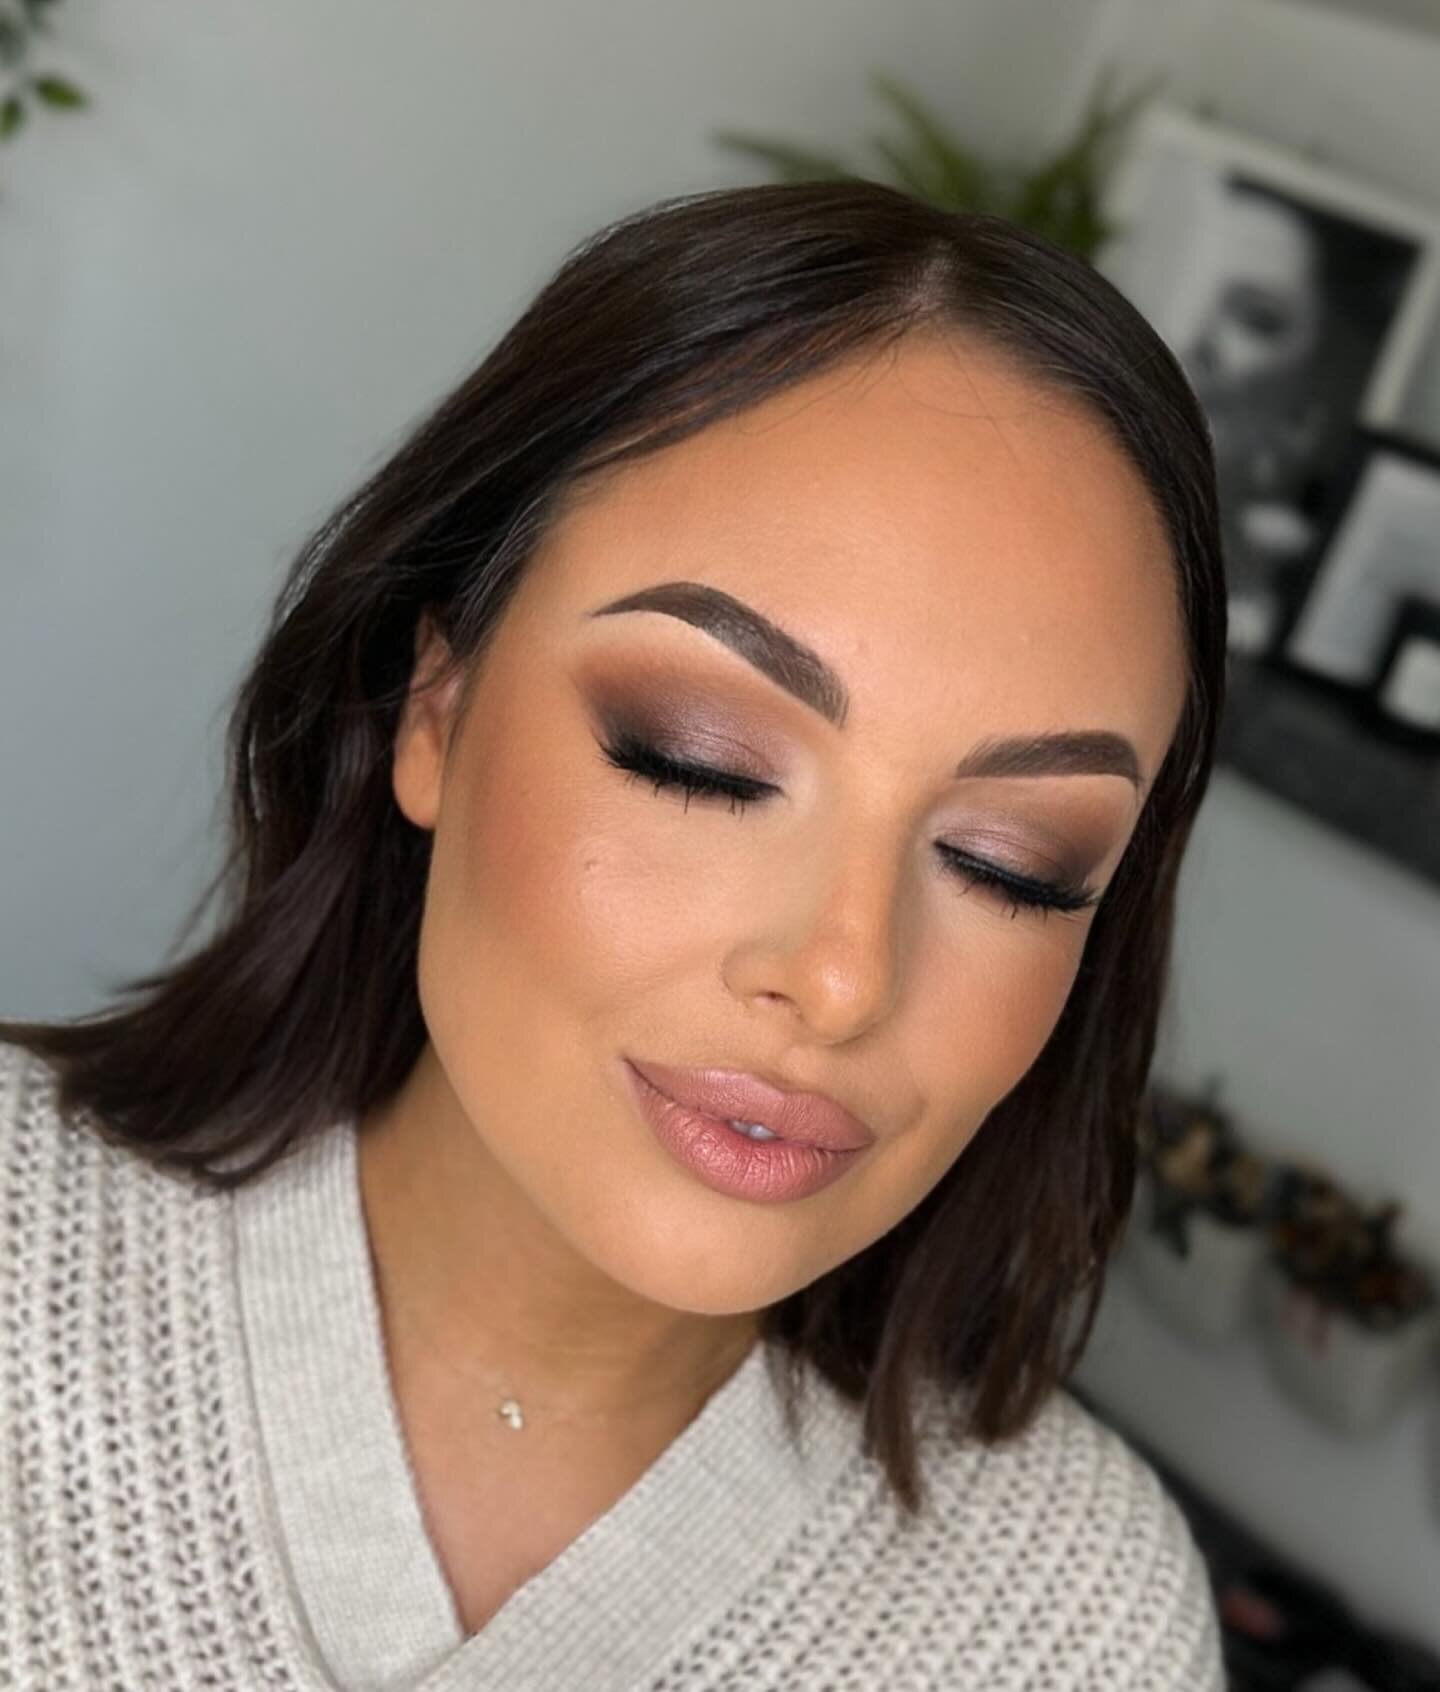 Always a pleasure to see this one @viccivalentine over the weekend 💖

SKINCARE ✨
@pixibeauty glow tonic
@bobbibrownuk face base
@maccosmetics studio fix plus spray 

BASE✨
@narsissist light reflecting (for glow) mixed with @esteelauderuk double wear